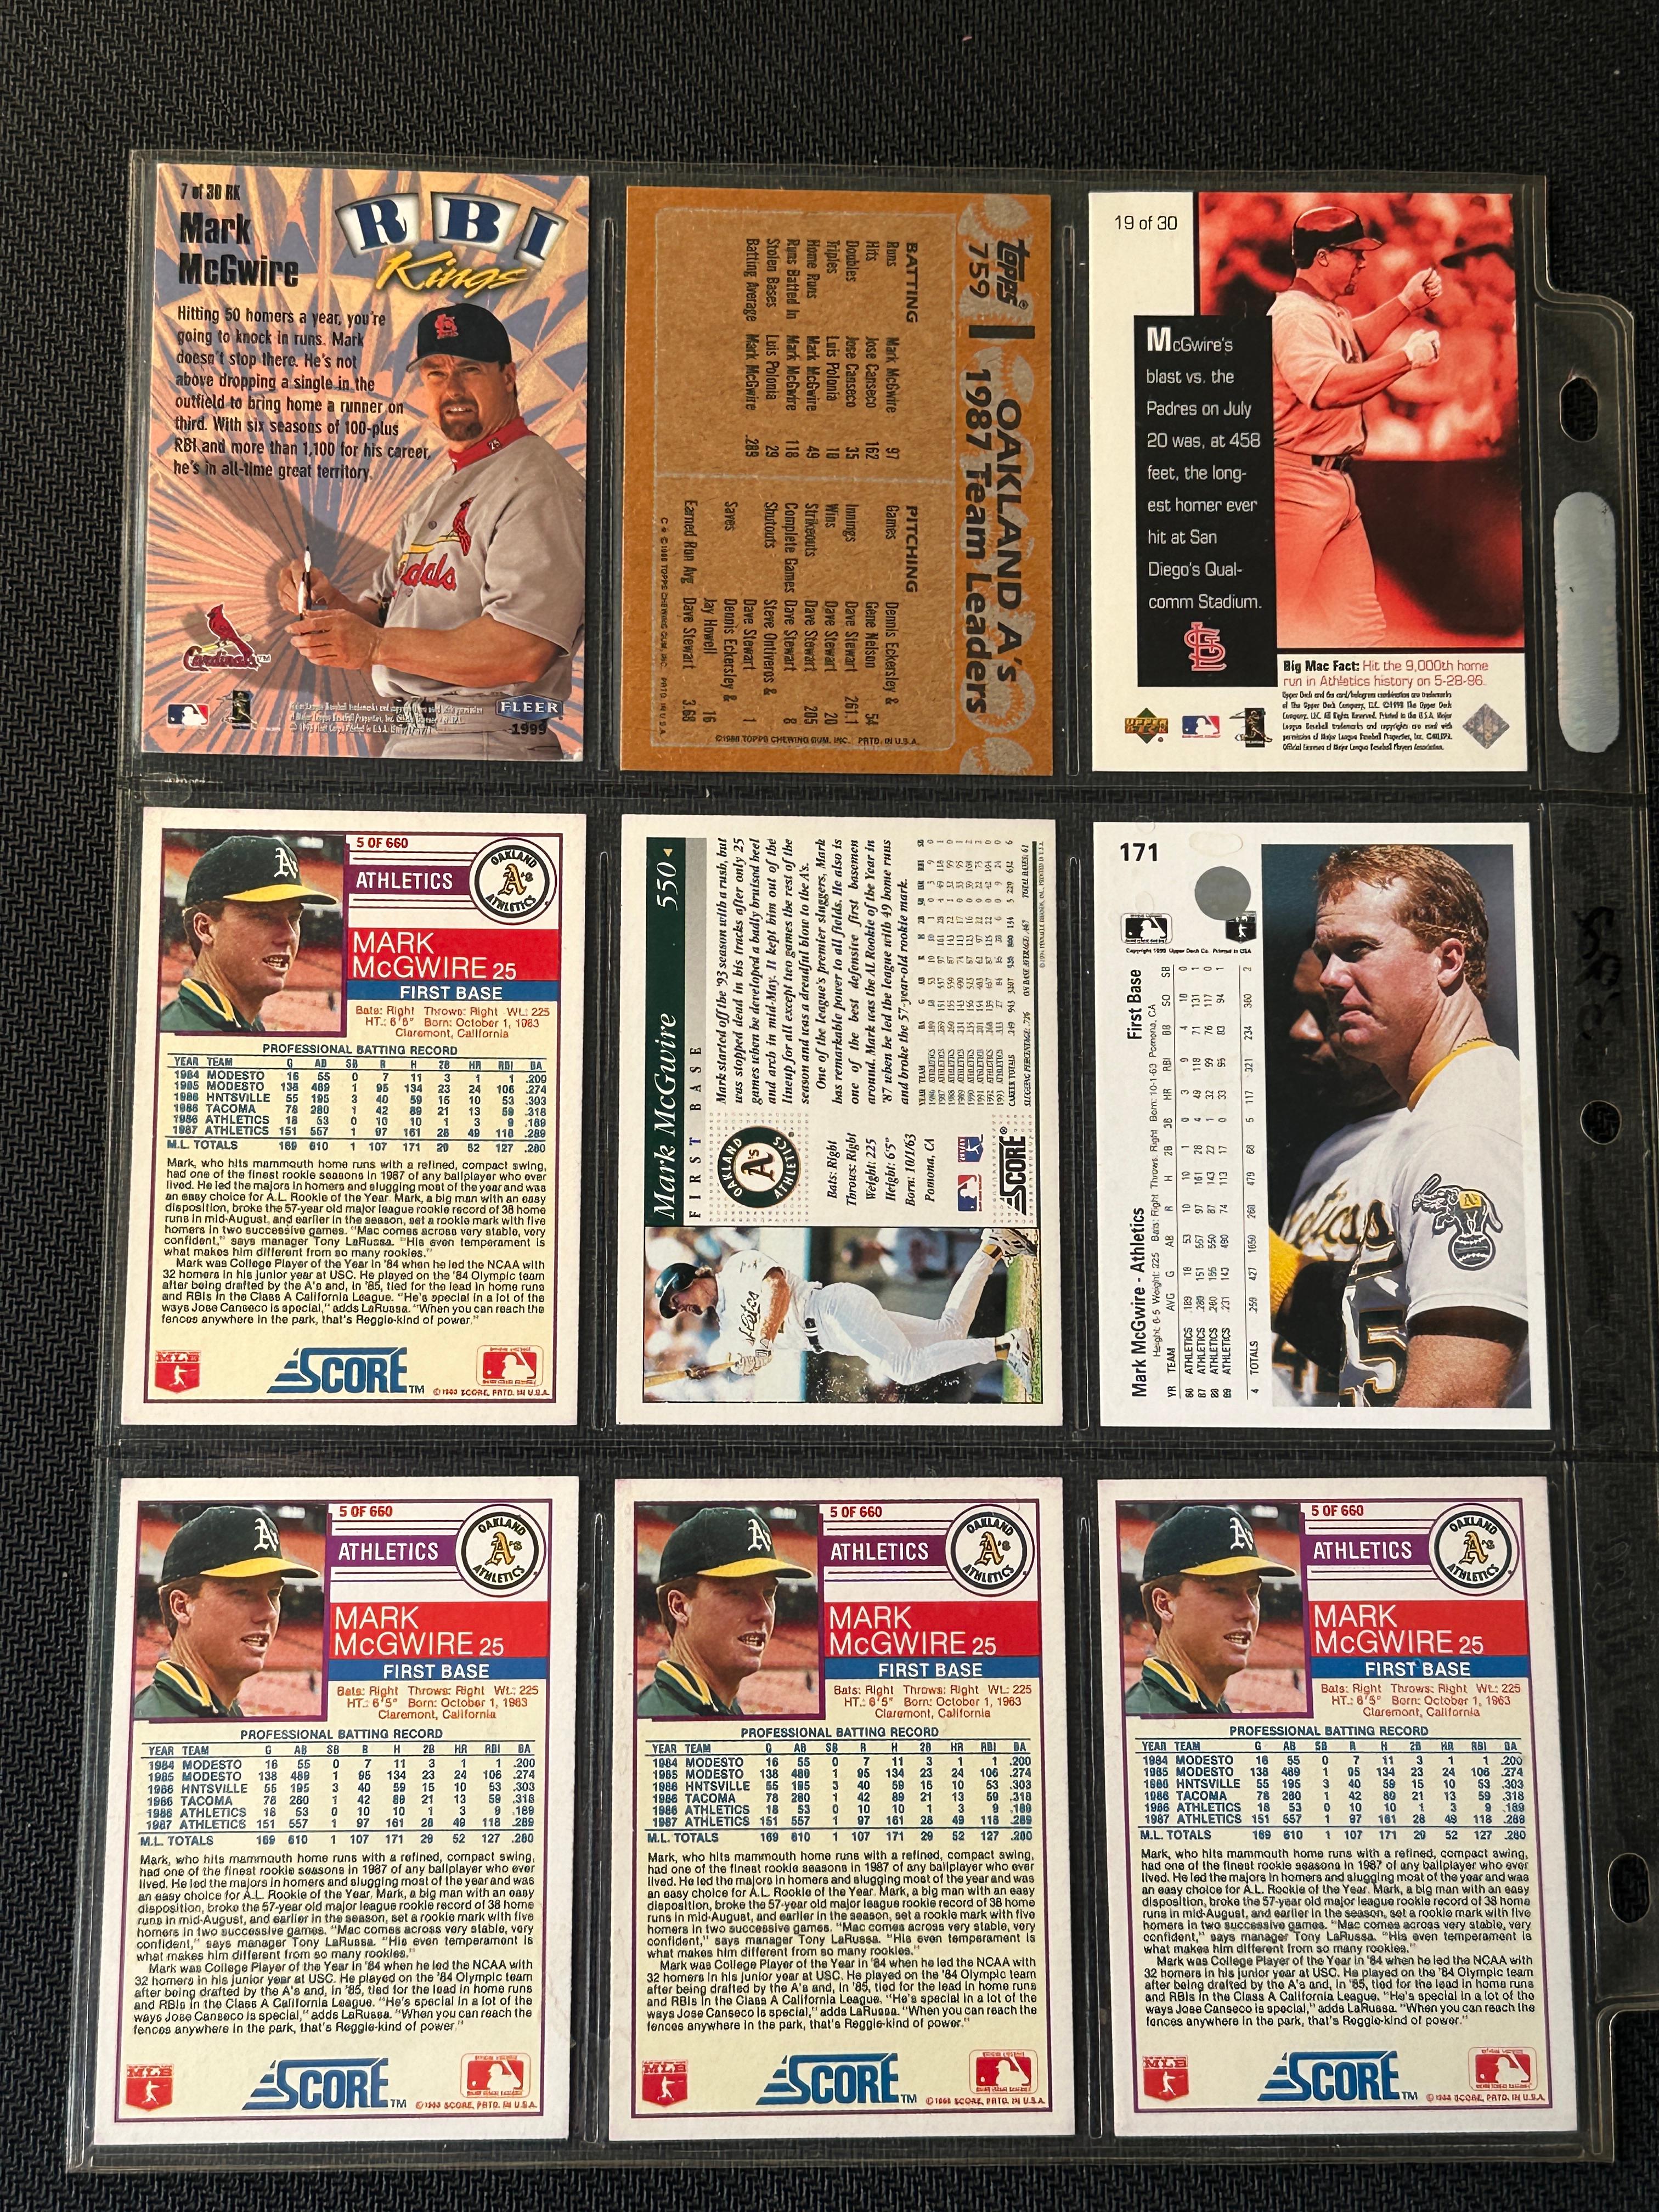 Mark McGwire 9 Card Lot in Pages - Several same, others different years, conditions